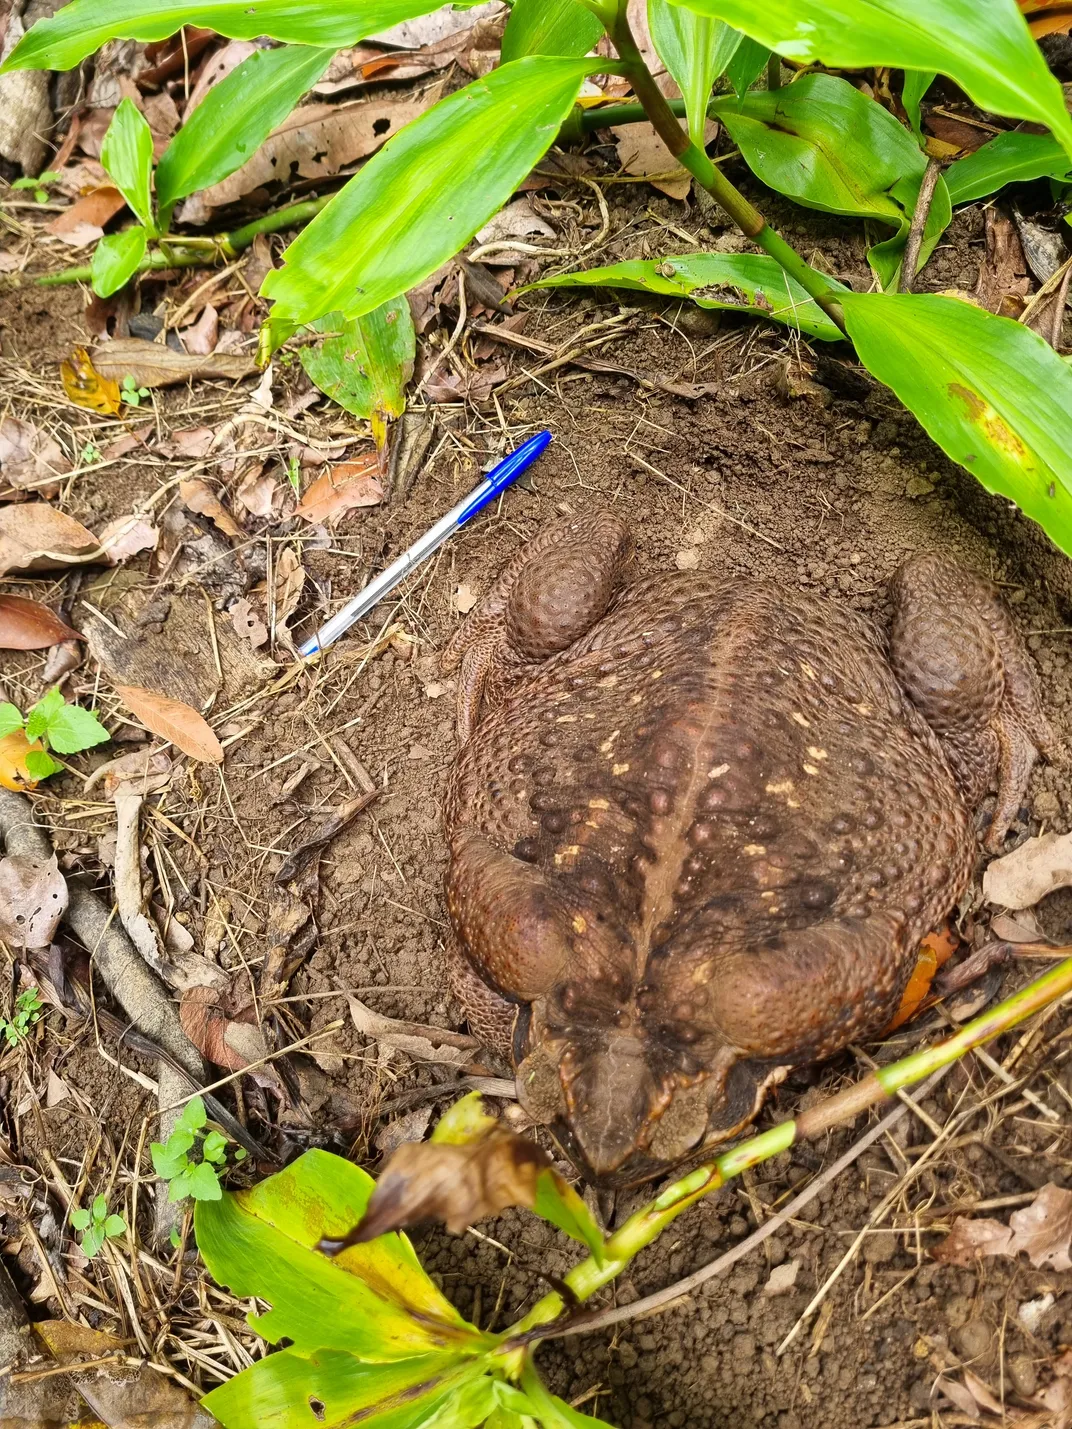 toad in dirt appears about 1.5 times length of pen